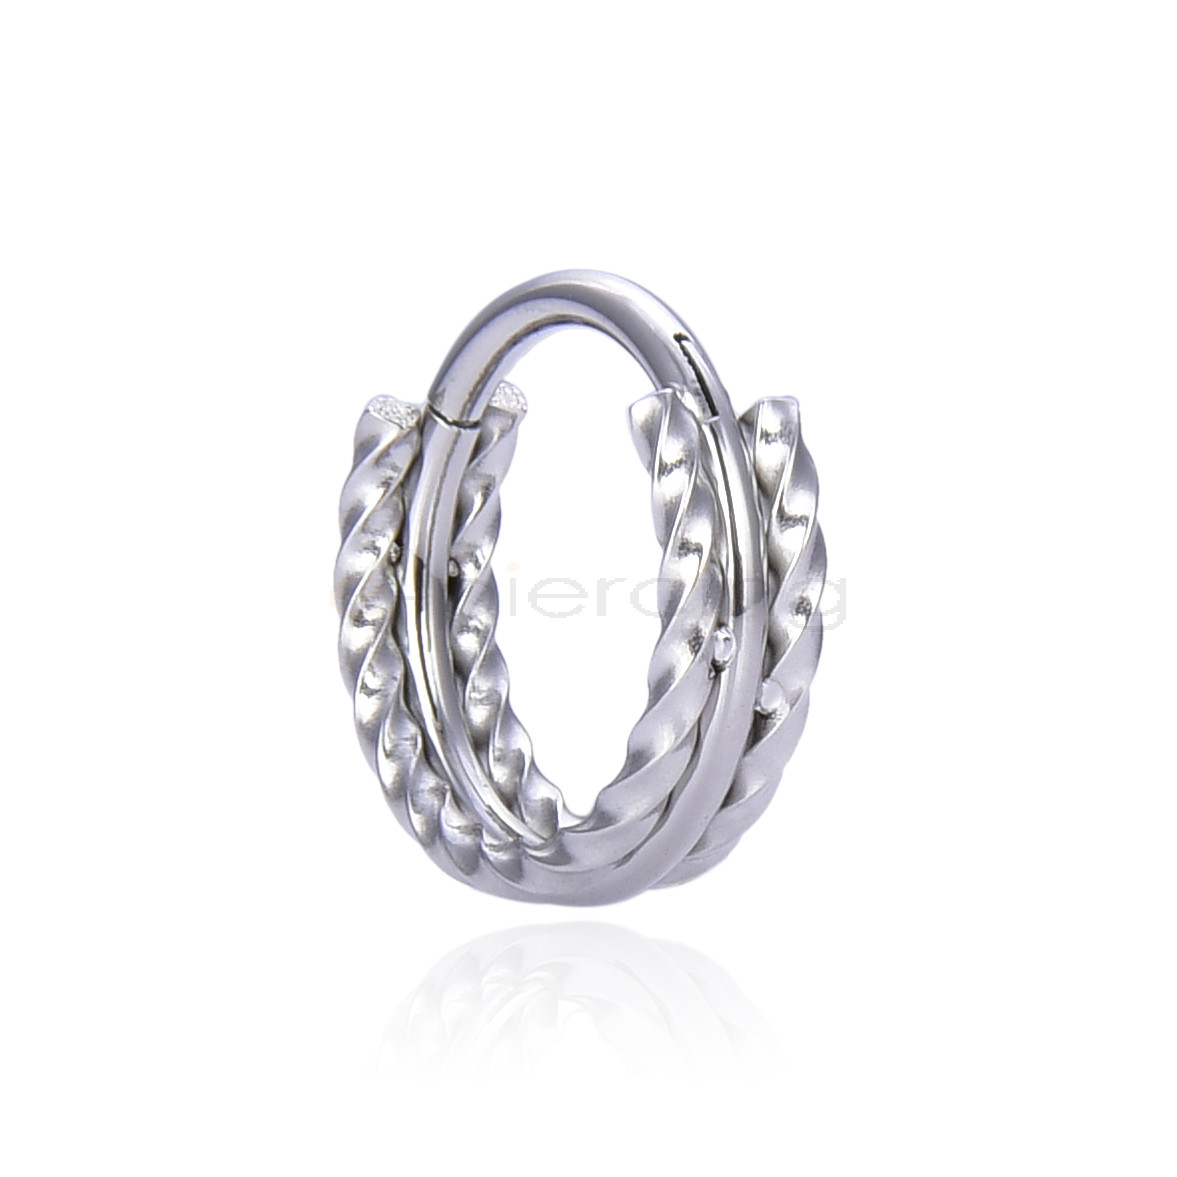 Helix - Hinged Segment Ring 1.2x10mm Surgical Steel 316L 90050S